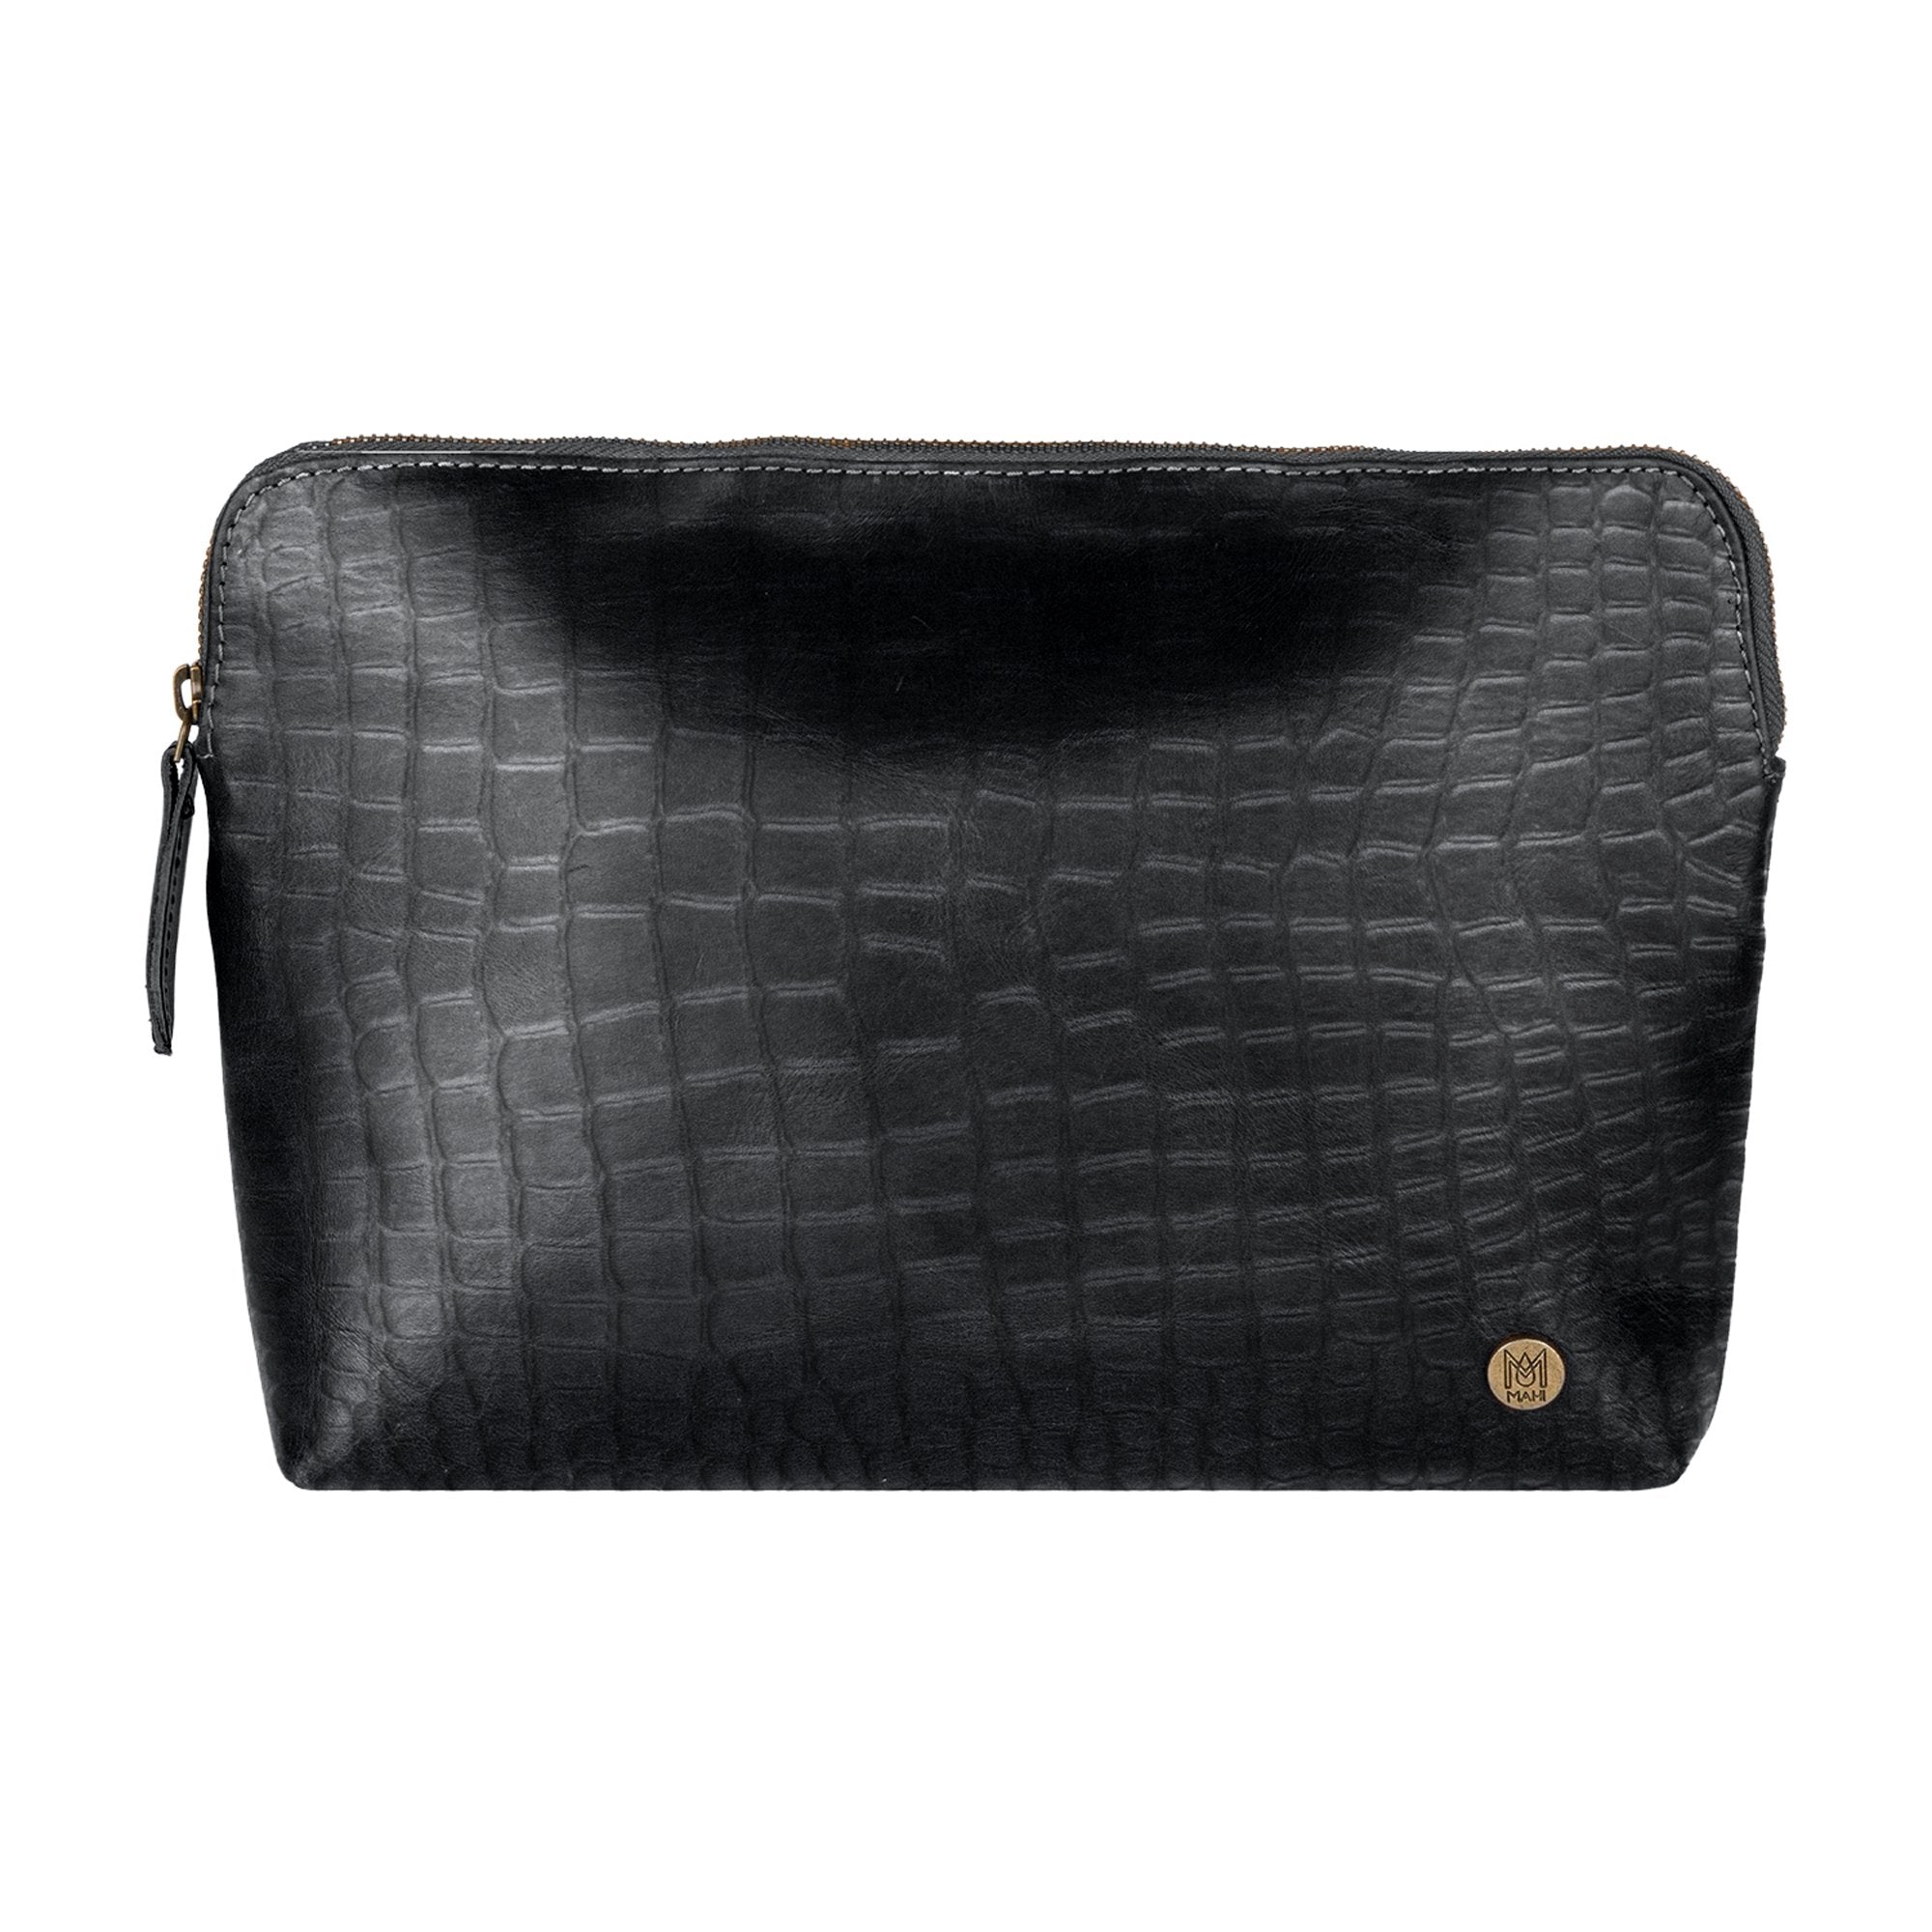  Shretty PU Leather Makeup Bag travel organizer Crocodile  Cosmetic Bag Portable Artist Storage Bag with Adjustable Dividers for Women  Cosmetics Brushes Toiletry, Black Crocodile Pattern : Beauty & Personal Care